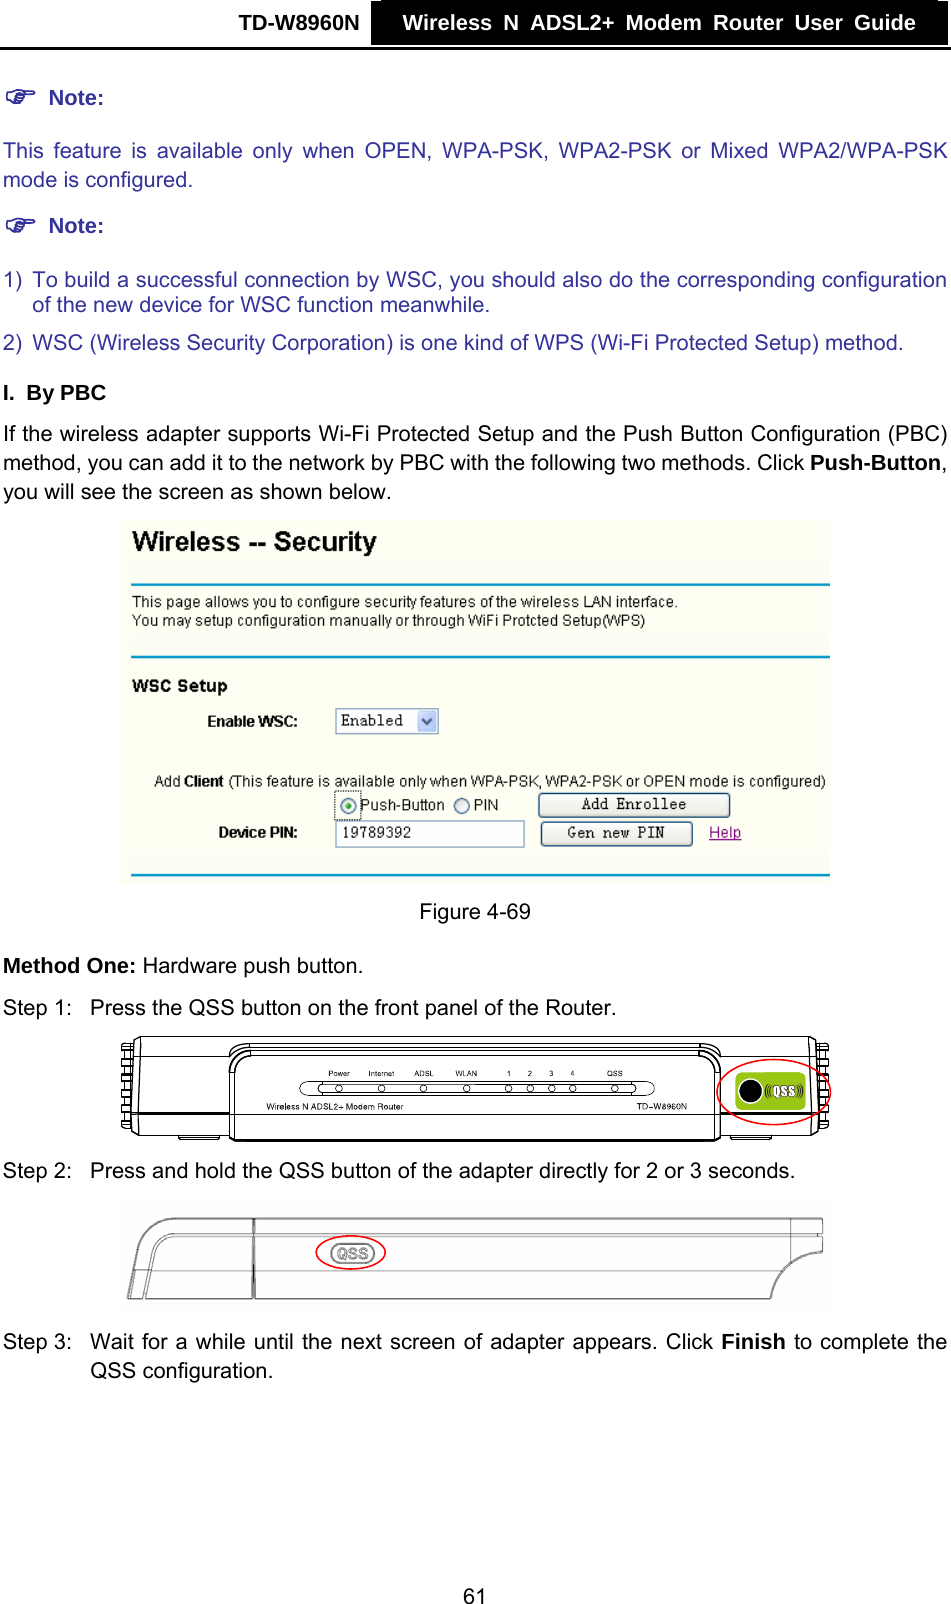 TD-W8960N    Wireless N ADSL2+ Modem Router User Guide    ) Note: This feature is available only when OPEN, WPA-PSK, WPA2-PSK or Mixed WPA2/WPA-PSK mode is configured. ) Note: 1)  To build a successful connection by WSC, you should also do the corresponding configuration of the new device for WSC function meanwhile. 2)  WSC (Wireless Security Corporation) is one kind of WPS (Wi-Fi Protected Setup) method. I. By PBC If the wireless adapter supports Wi-Fi Protected Setup and the Push Button Configuration (PBC) method, you can add it to the network by PBC with the following two methods. Click Push-Button, you will see the screen as shown below.  Figure 4-69 Method One: Hardware push button. Step 1:  Press the QSS button on the front panel of the Router.  Step 2:  Press and hold the QSS button of the adapter directly for 2 or 3 seconds.  Step 3:  Wait for a while until the next screen of adapter appears. Click Finish to complete the QSS configuration. 61 